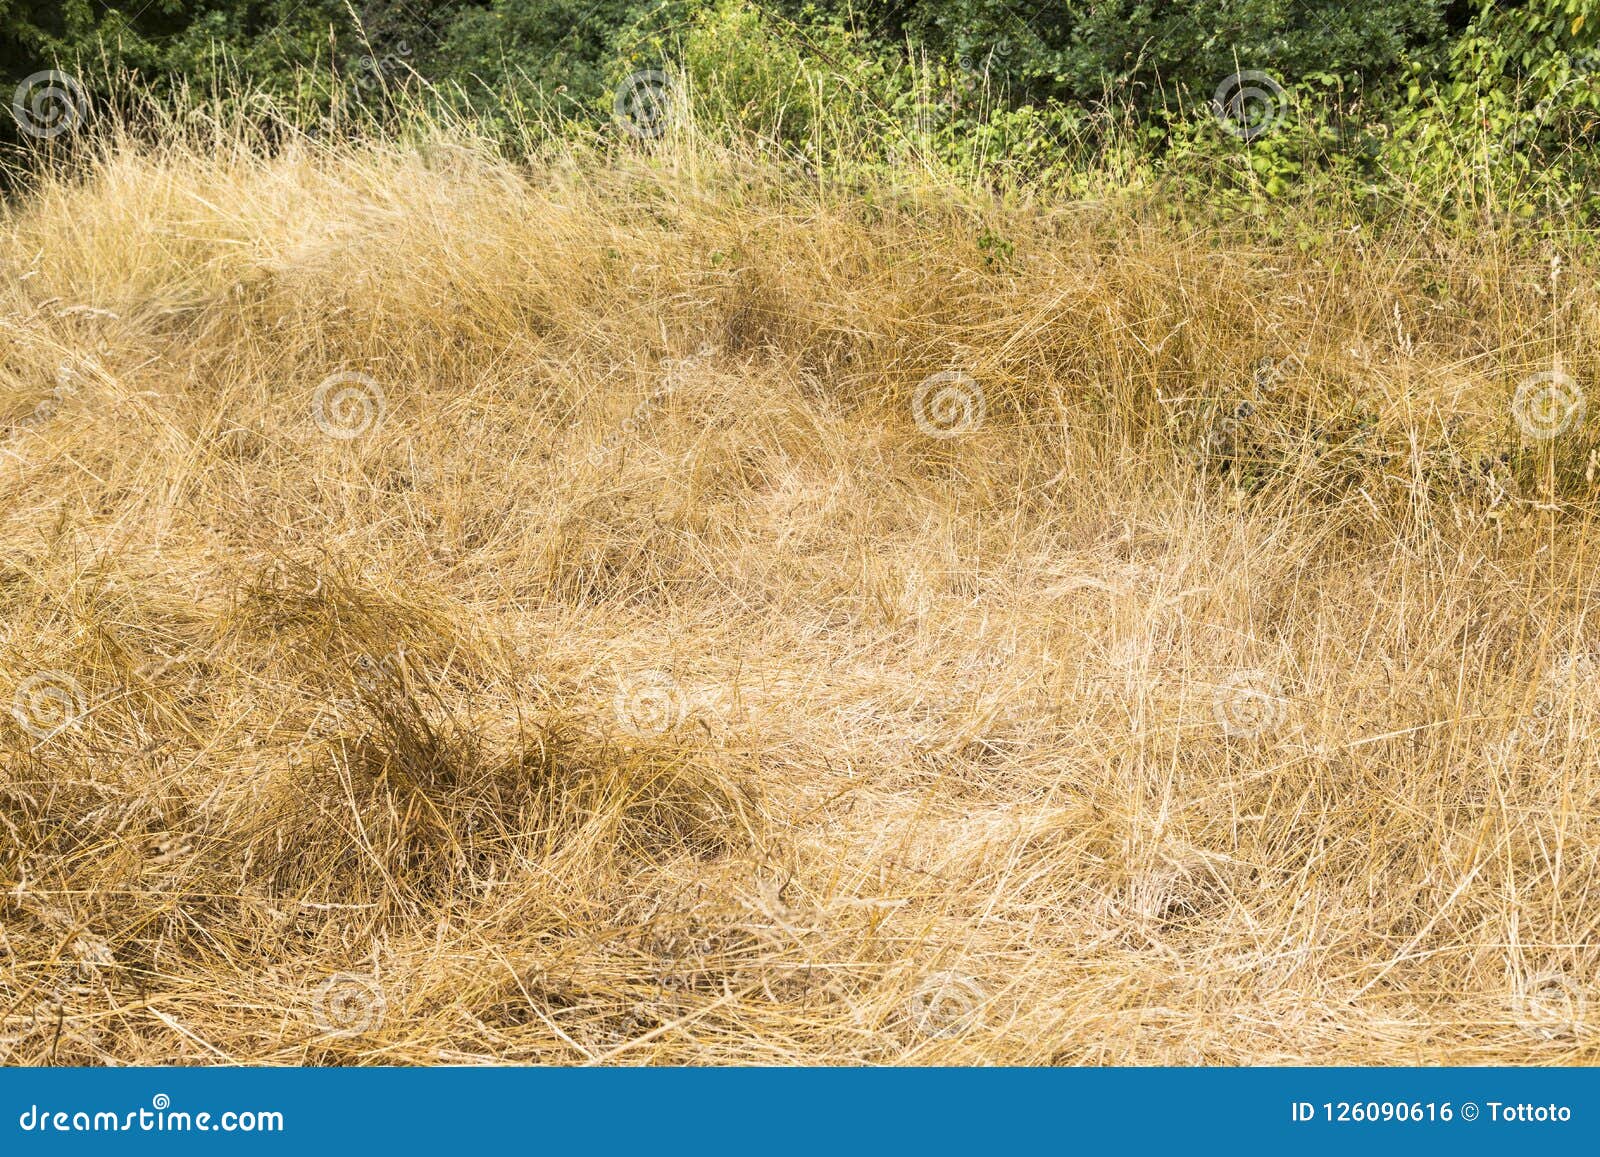 Dry yellow grass stock photo. Image of natural, country - 126090616